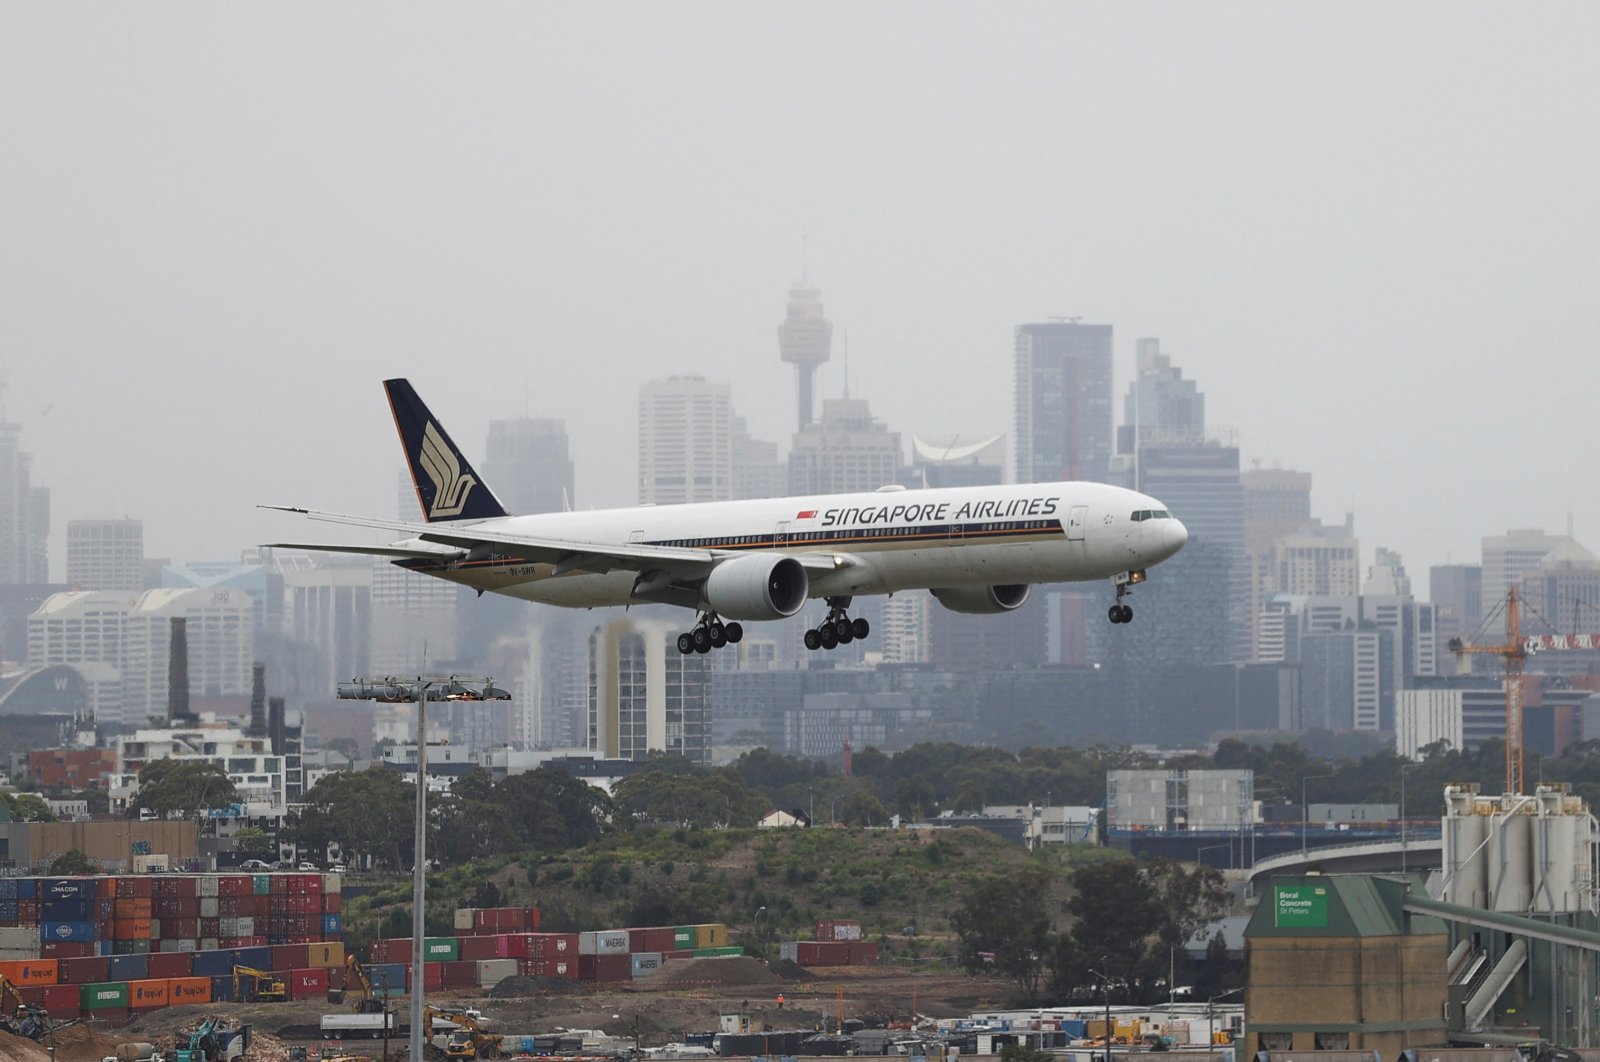 A Singapore Airlines plane arriving from Singapore lands at the international terminal at Sydney Airport, in Sydney, Australia, Nov. 30, 2021. (Reuters Photo)